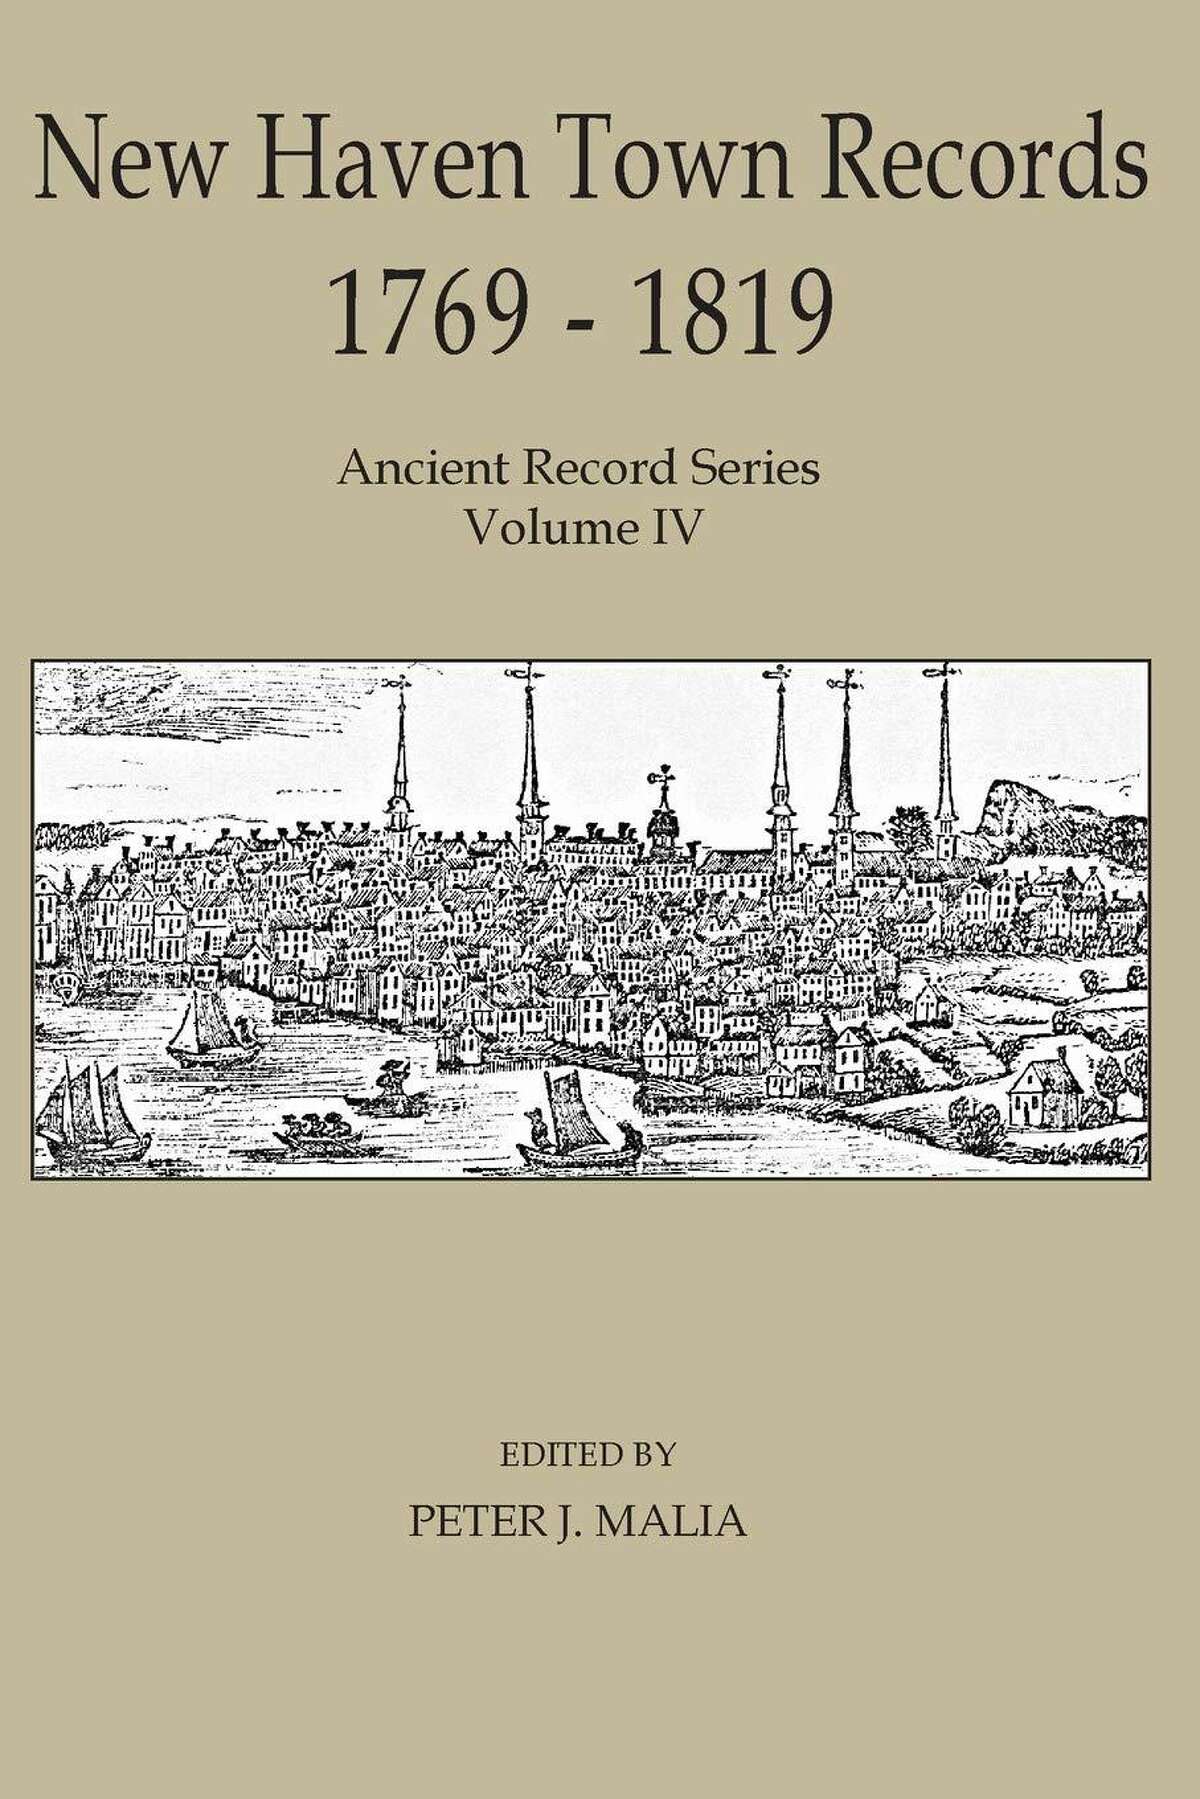 “New Haven Town Records 1769-1819”